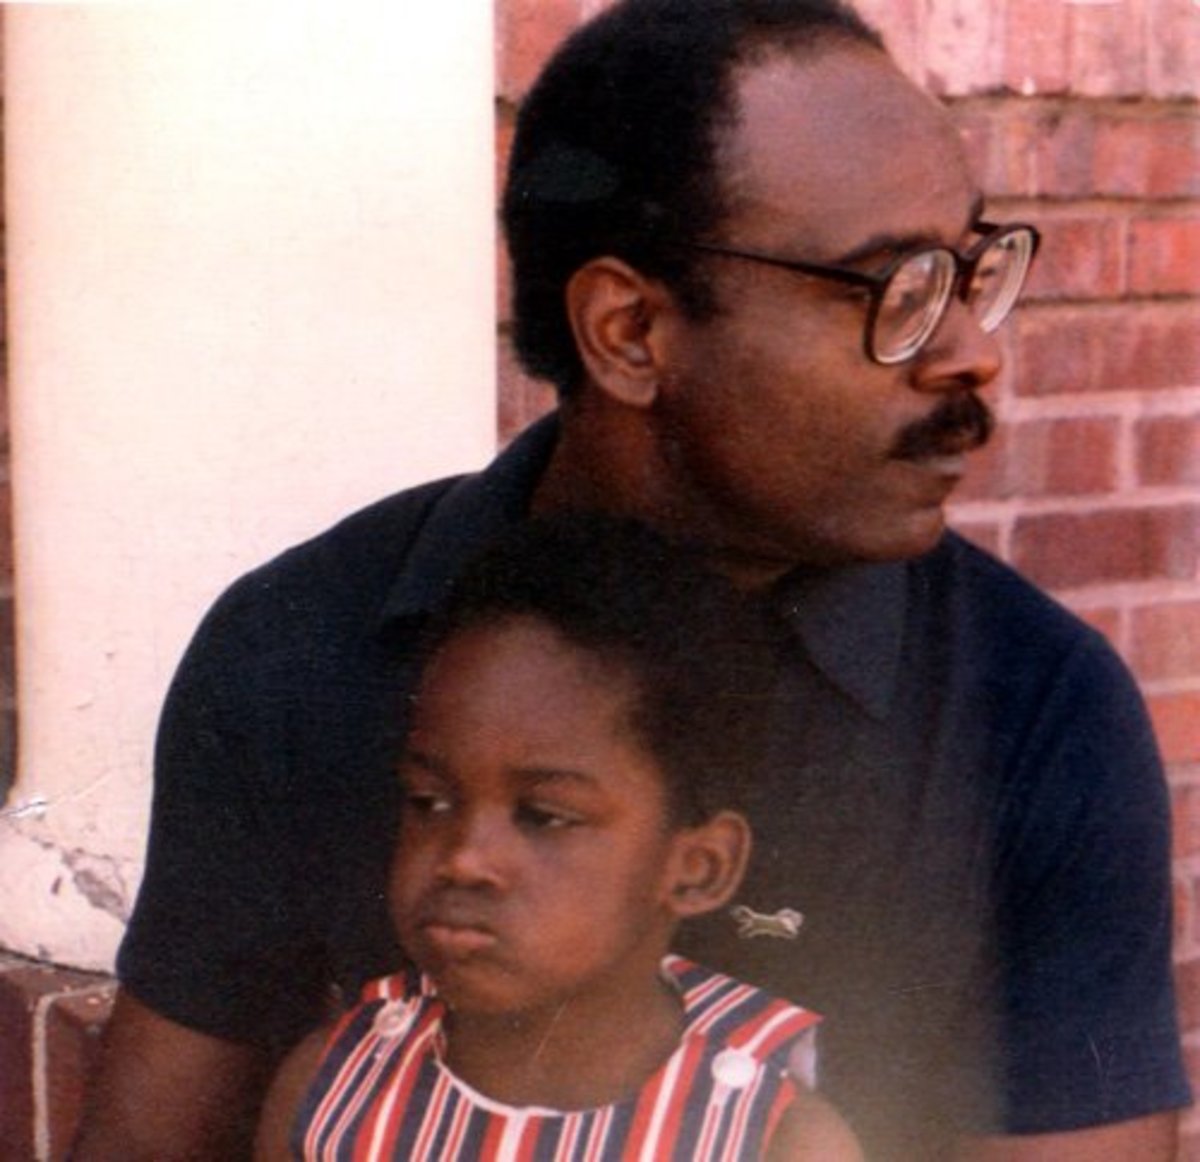 Chris Gardner with his son when he was homeless